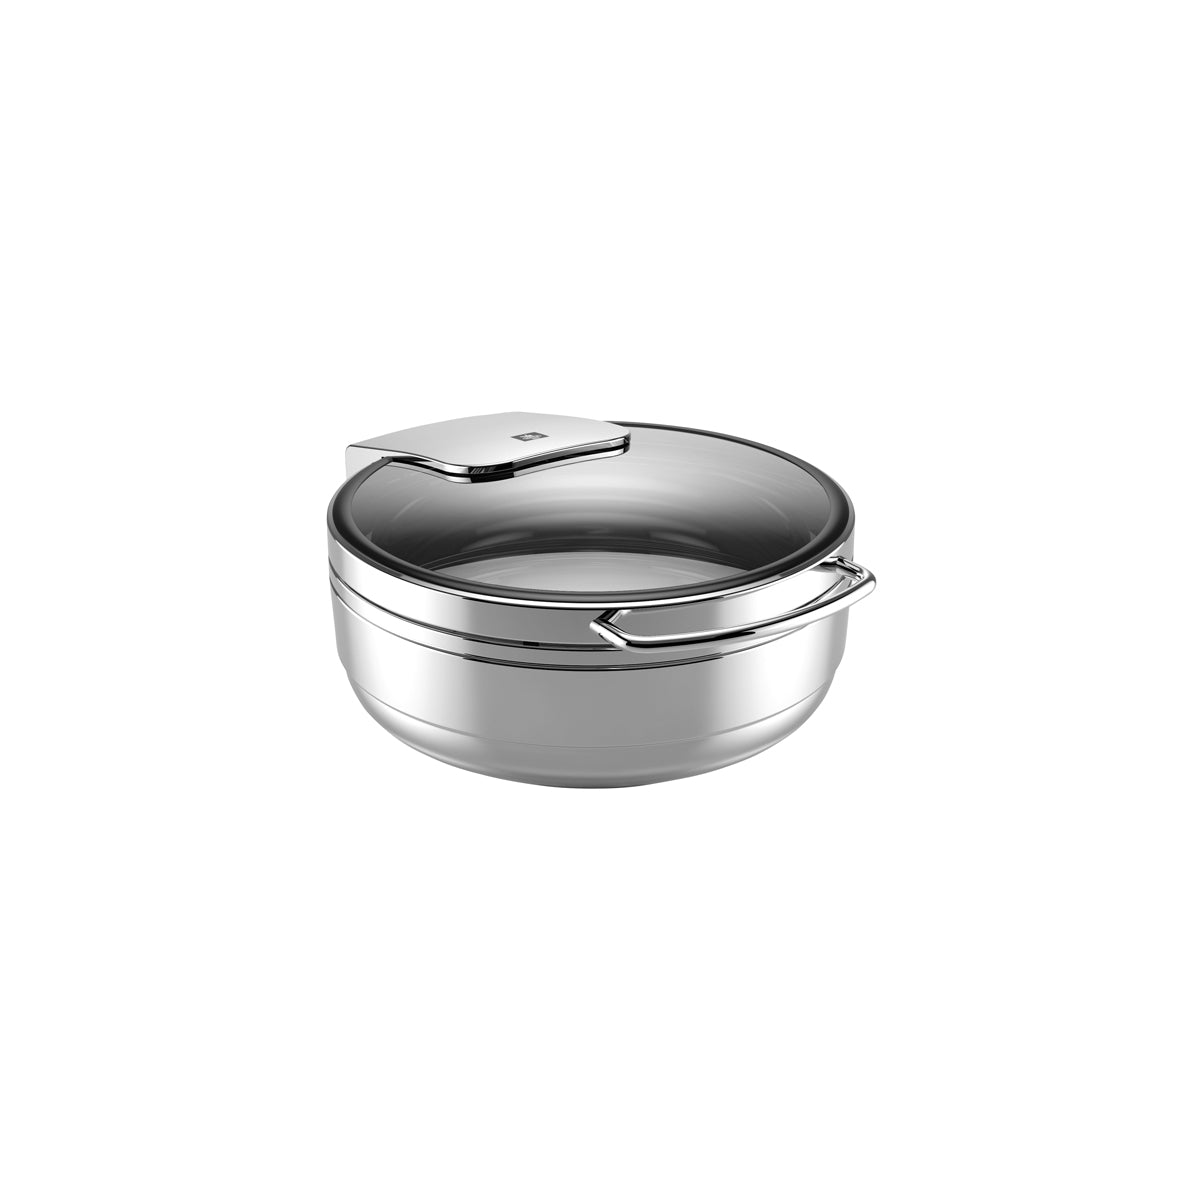 57.0001.6040 Hepp Arte Induction Chafer Round with Glass Lid Tomkin Australia Hospitality Supplies